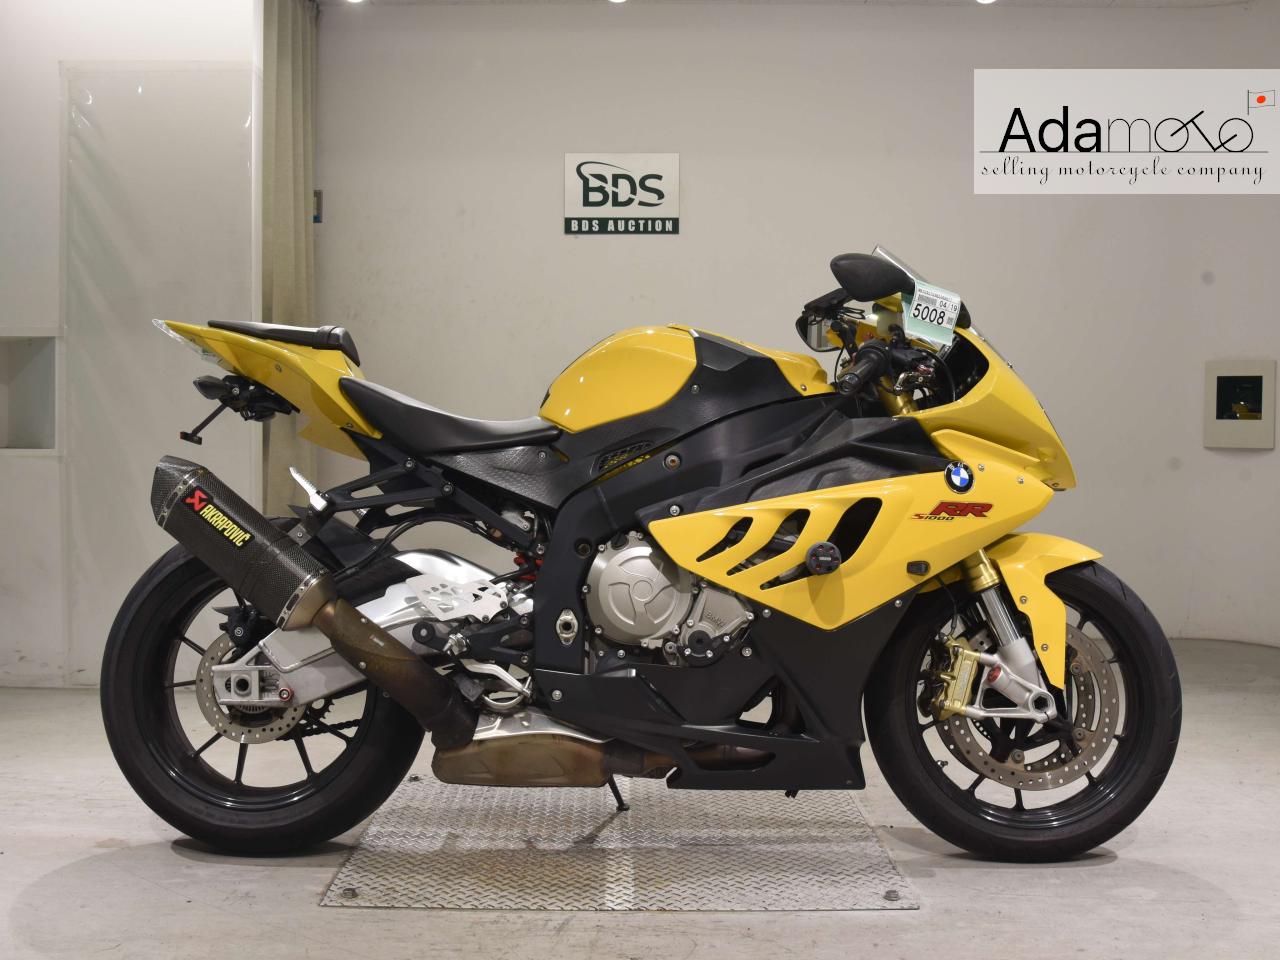 BMW S1000RR - Adamoto - Motorcycles from Japan